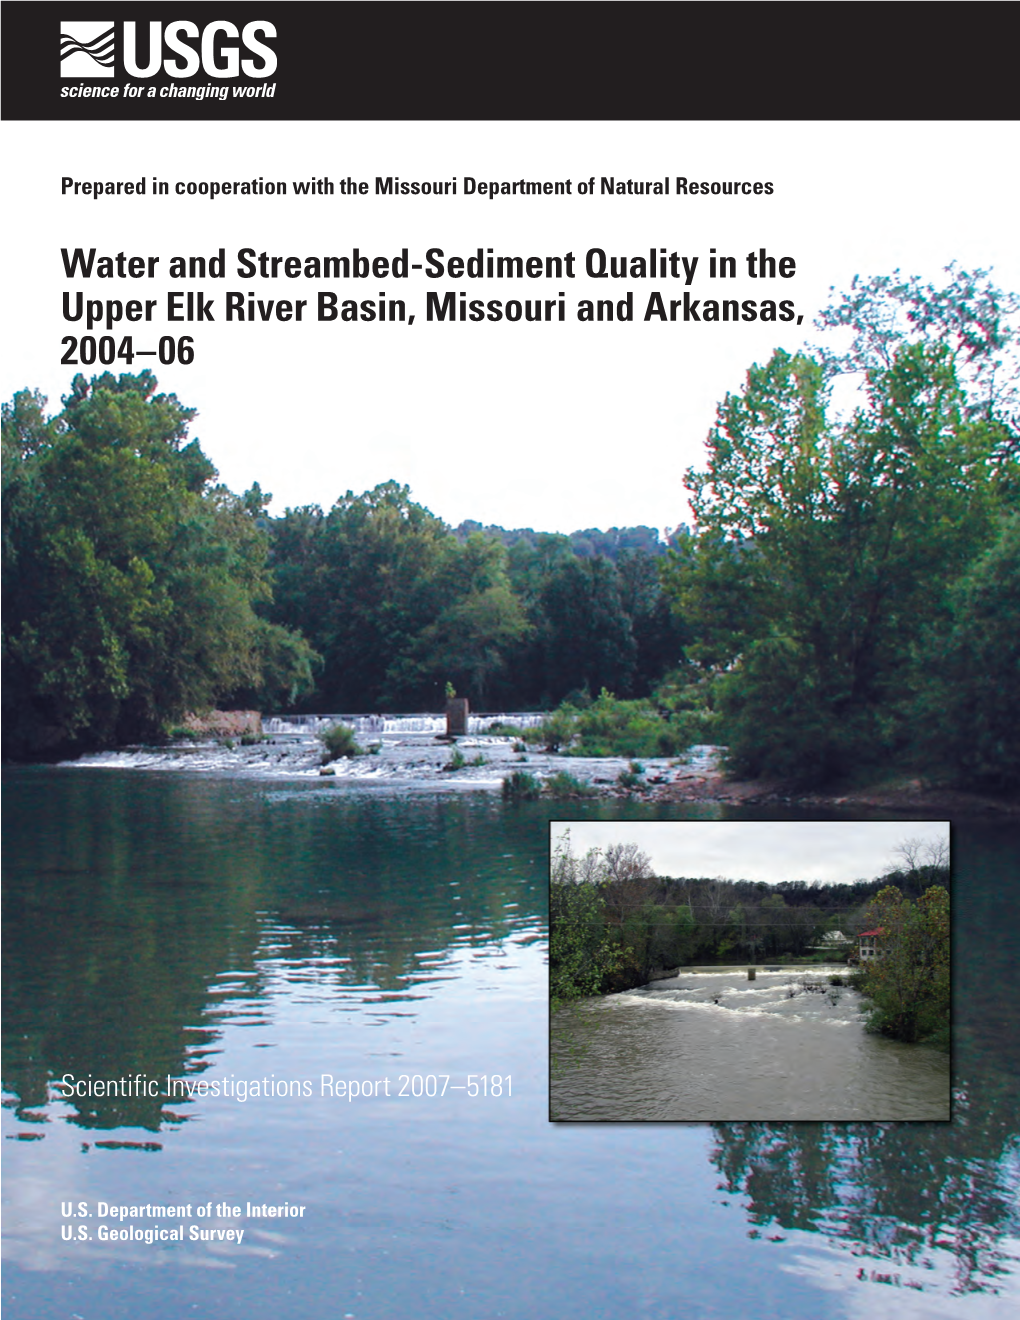 Water and Streambed-Sediment Quality in the Upper Elk River Basin, Missouri and Arkansas, 2004–06